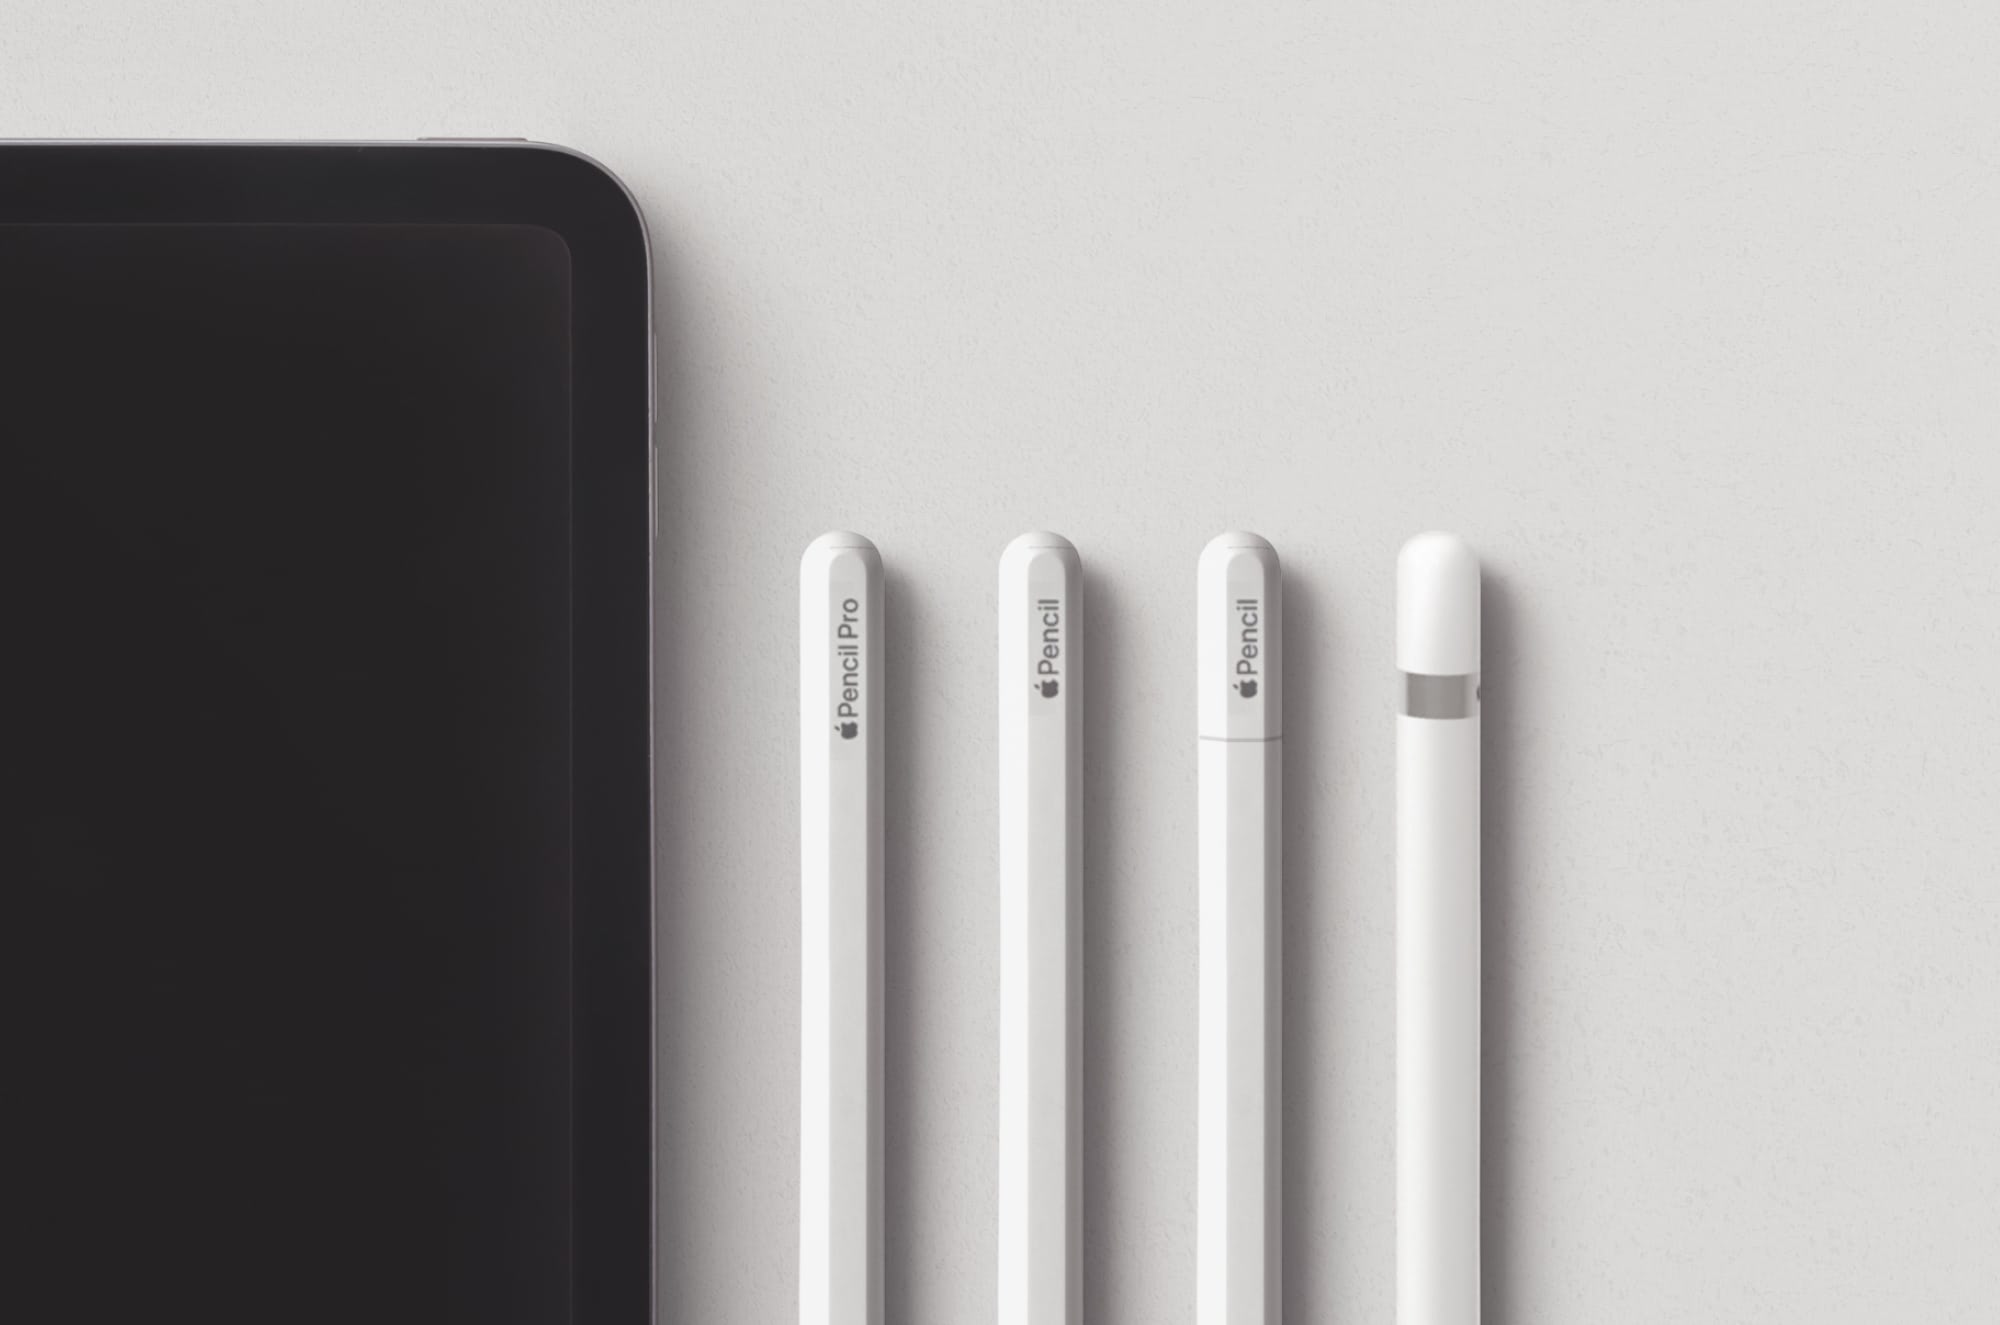 Is the Apple Pencil Really Worth Buying?